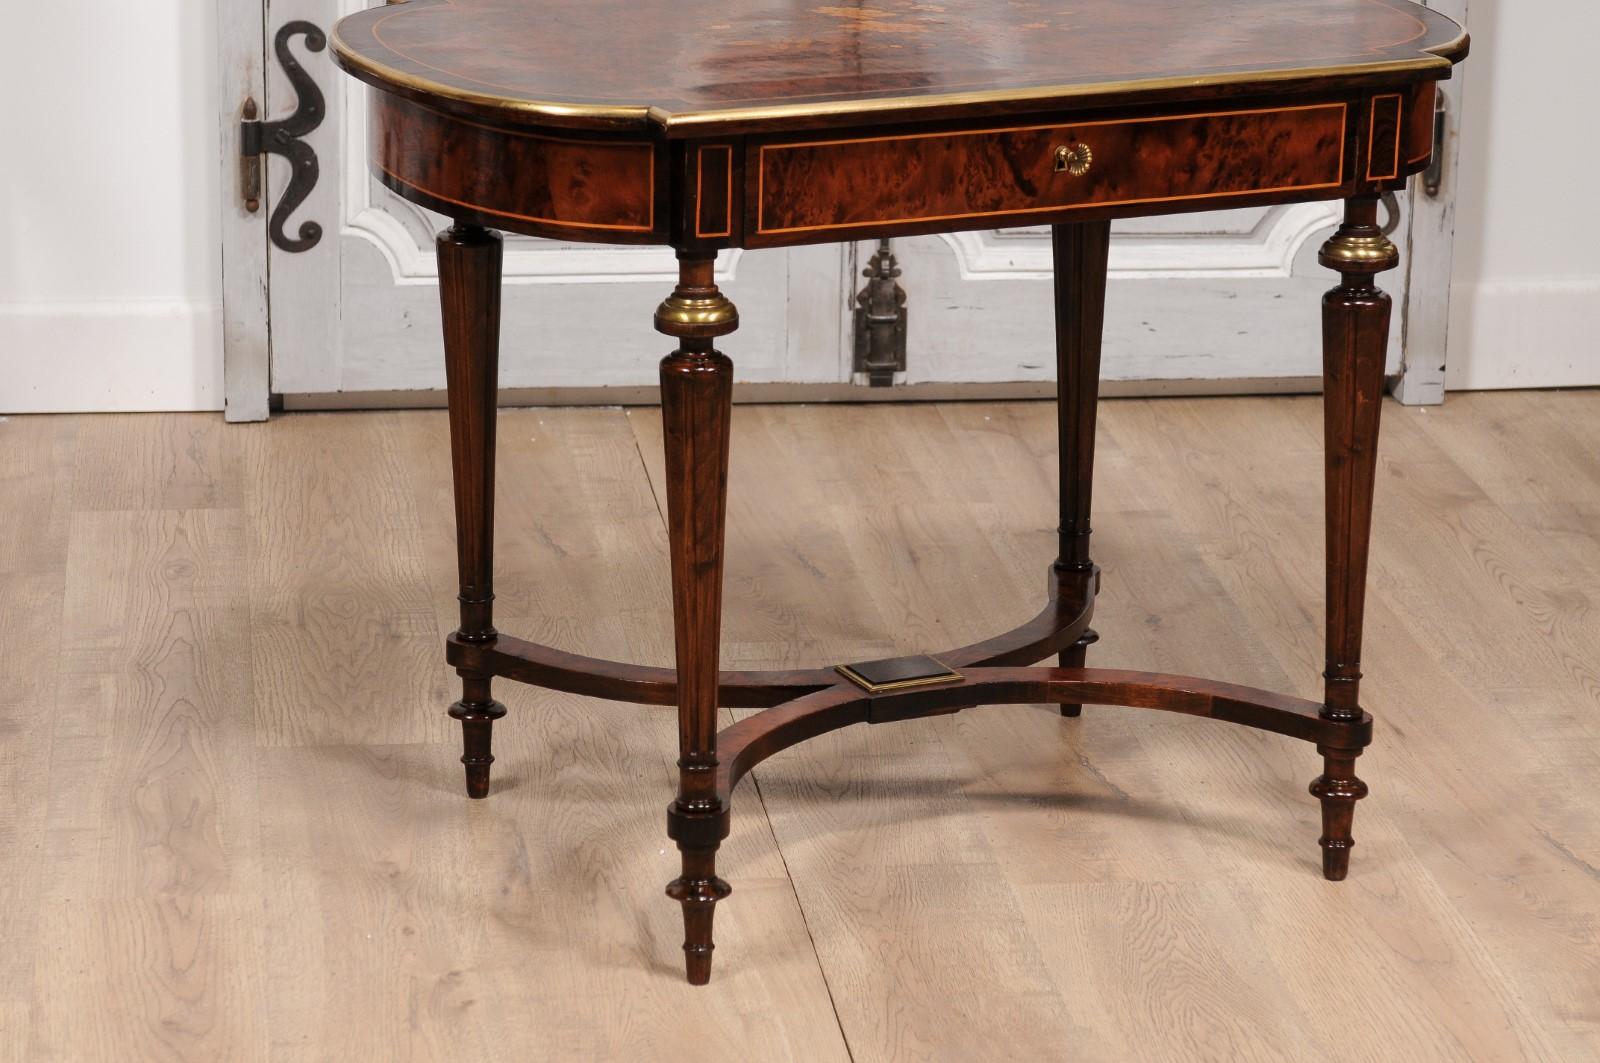 19th Century Italian 1890s Walnut, Mahogany and Brass Side Table with Floral Marquetry Décor For Sale